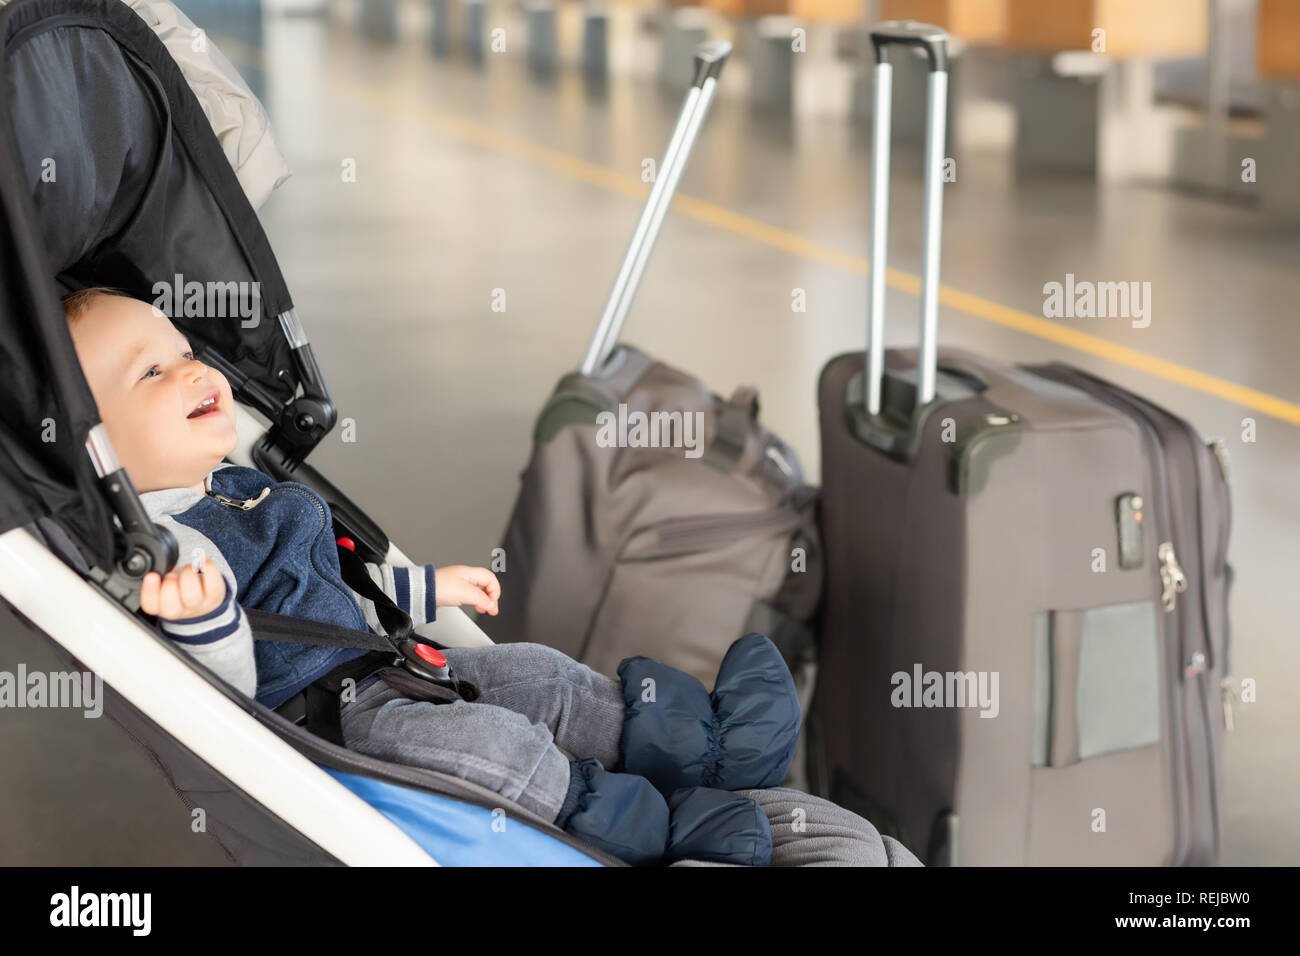 luggage stroller for toddlers